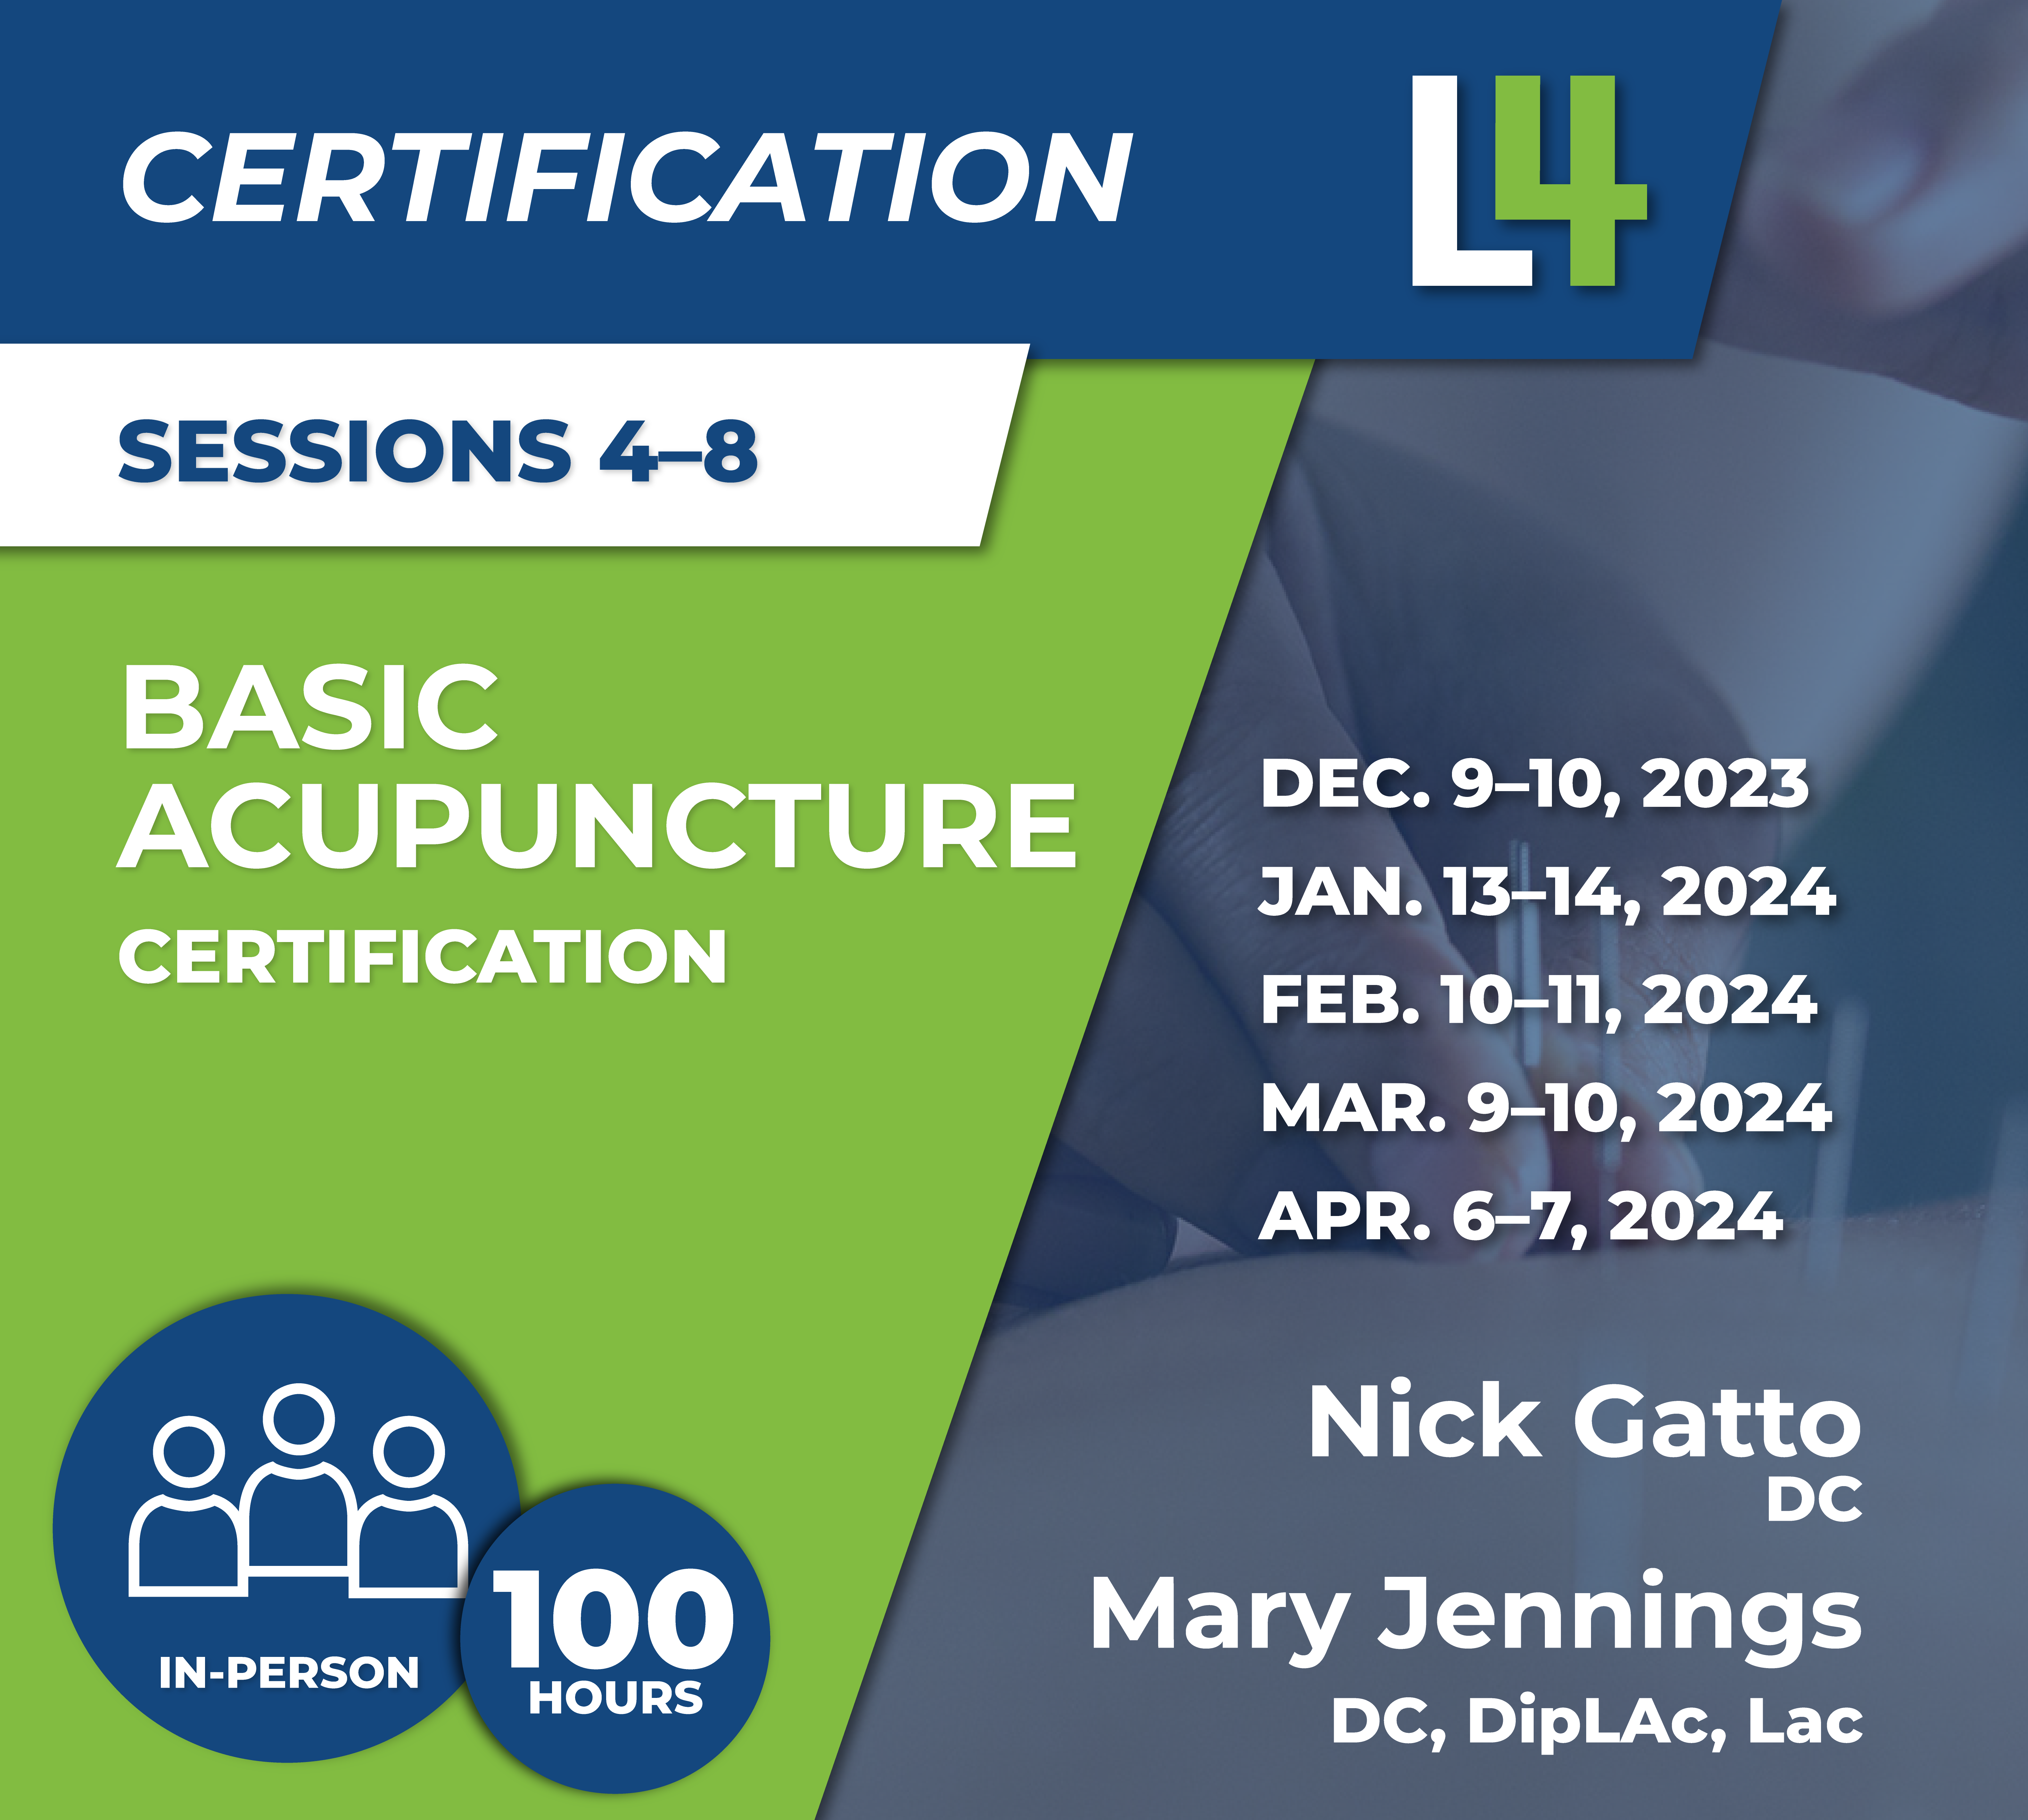 Basic Acupuncture Certification Sessions 5-8